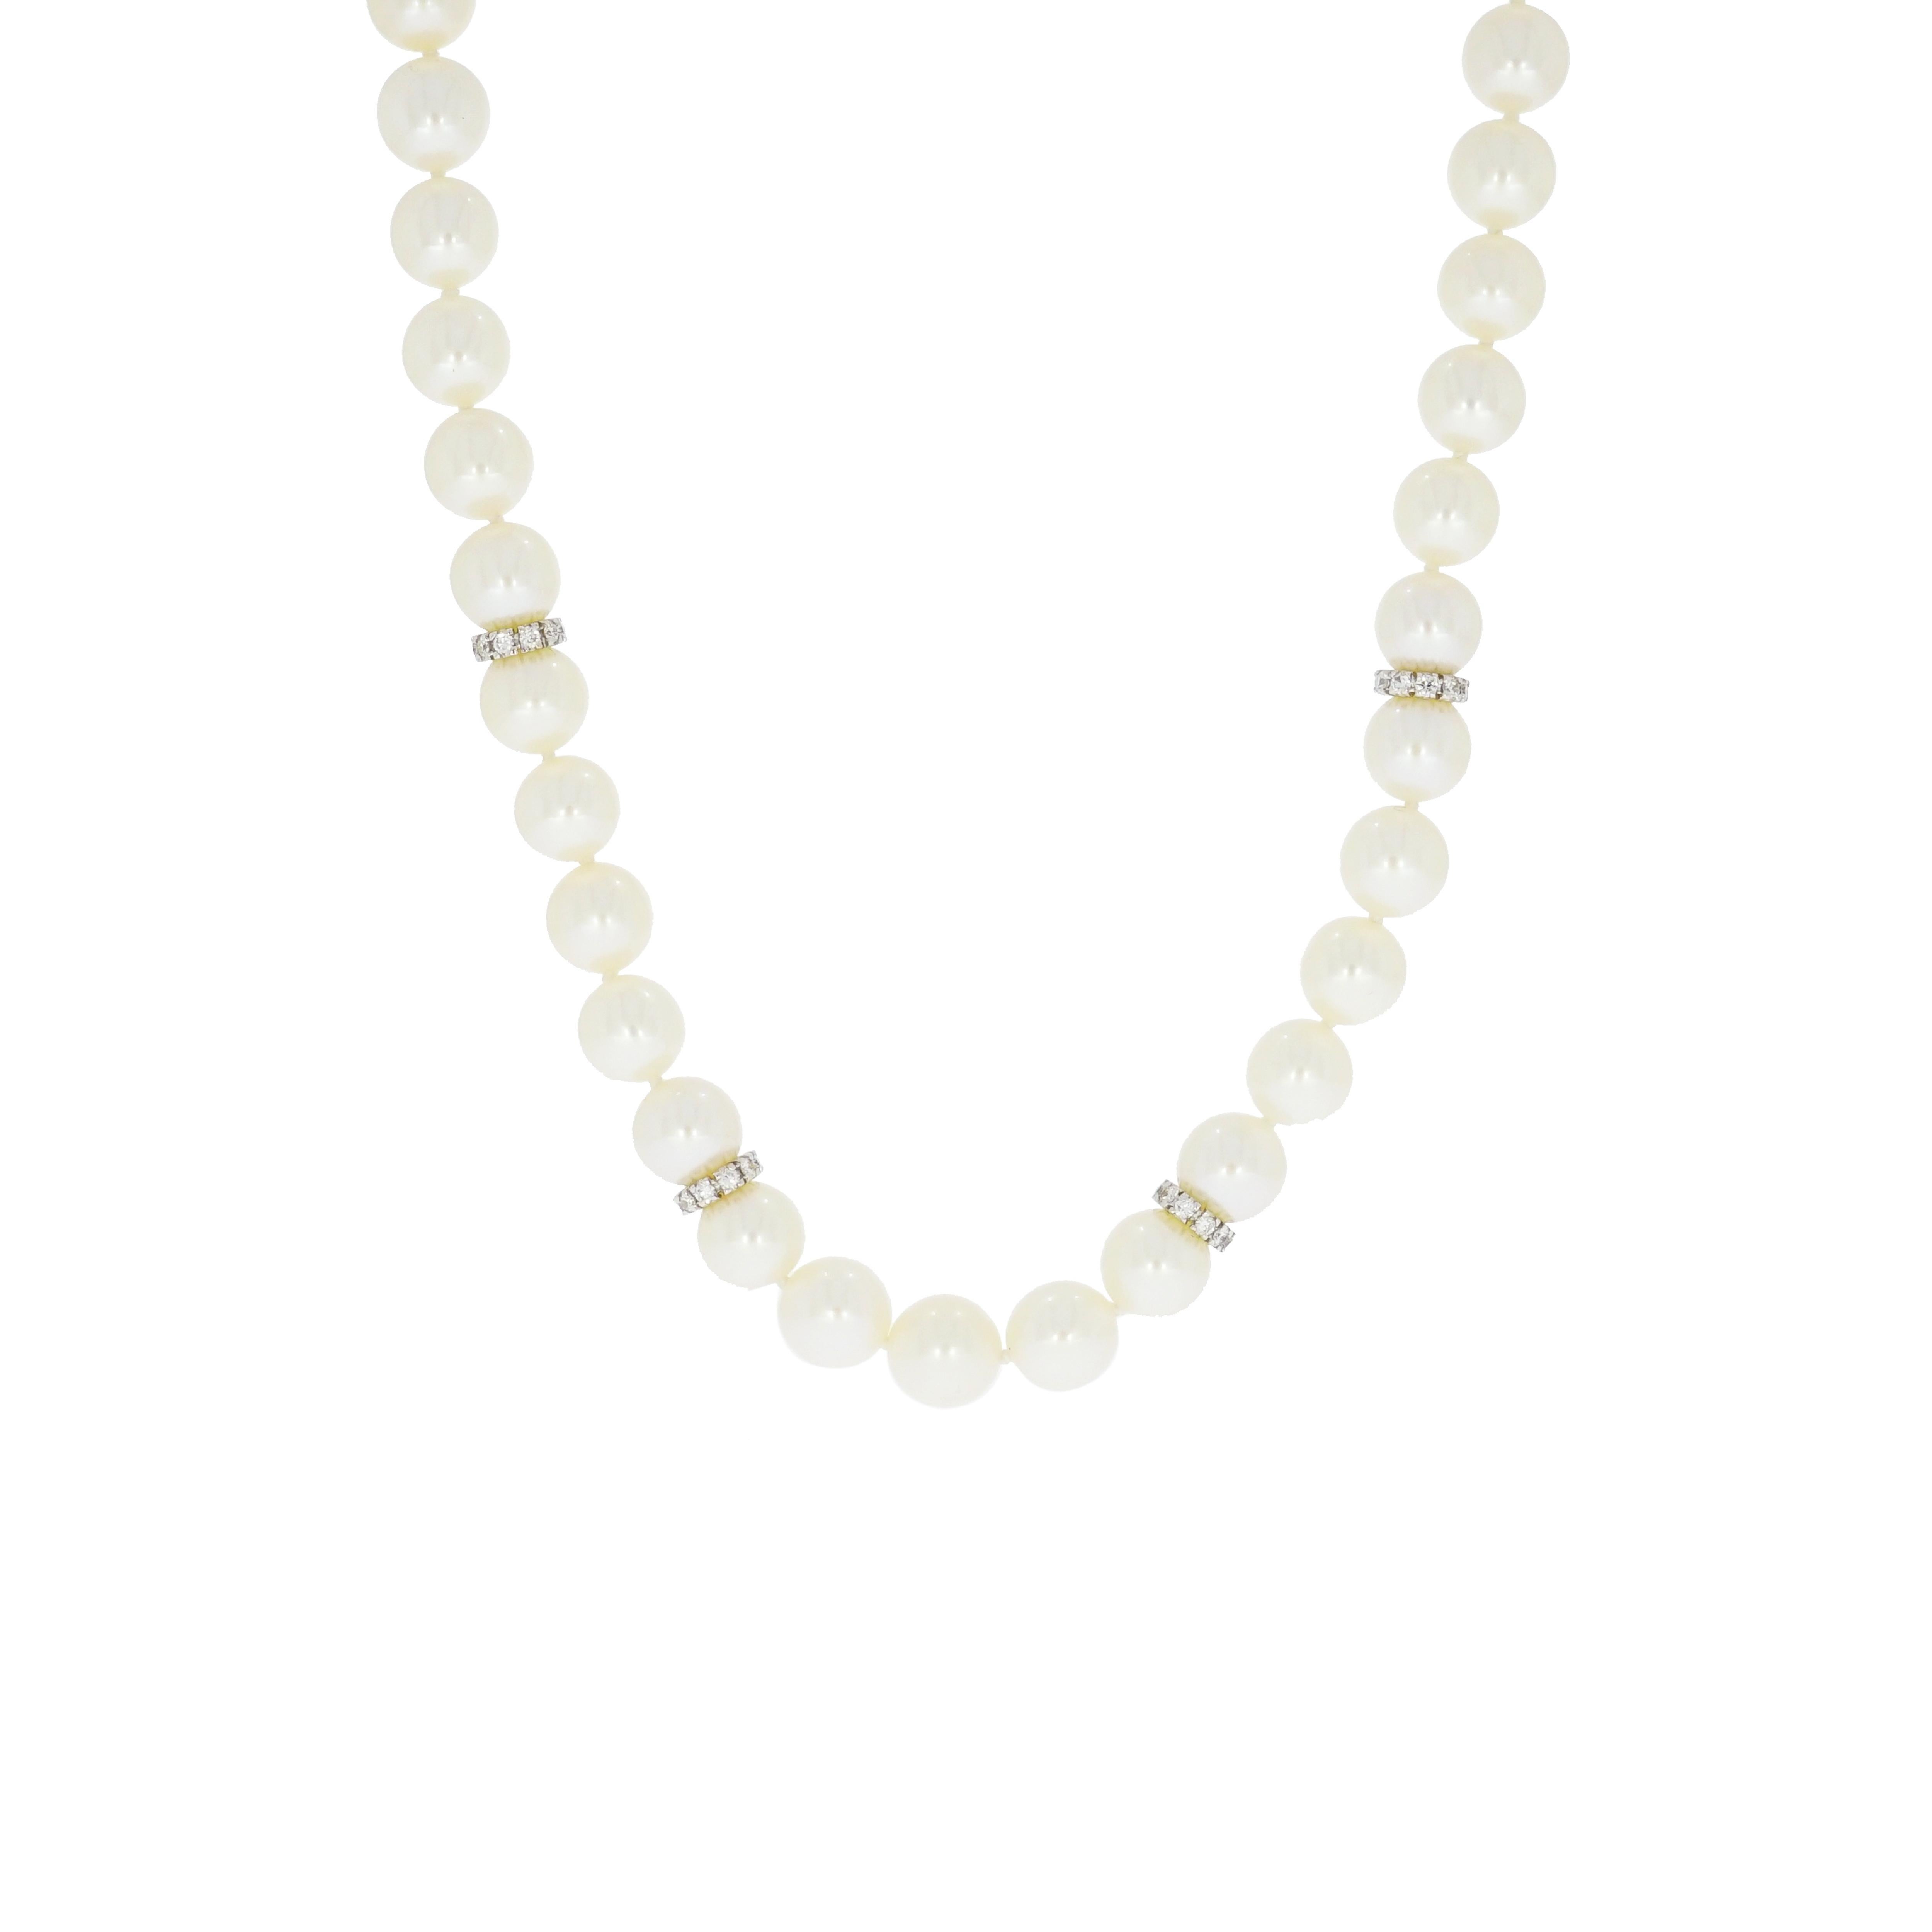 You've heard it before and you'll hear it again - pearls are timeless. 
There are many iterations of the classic pearl, but a one-of-a-kind version is sure to impress.
This precious pearl necklace features sixty one 7mm pearls with 4 diamond